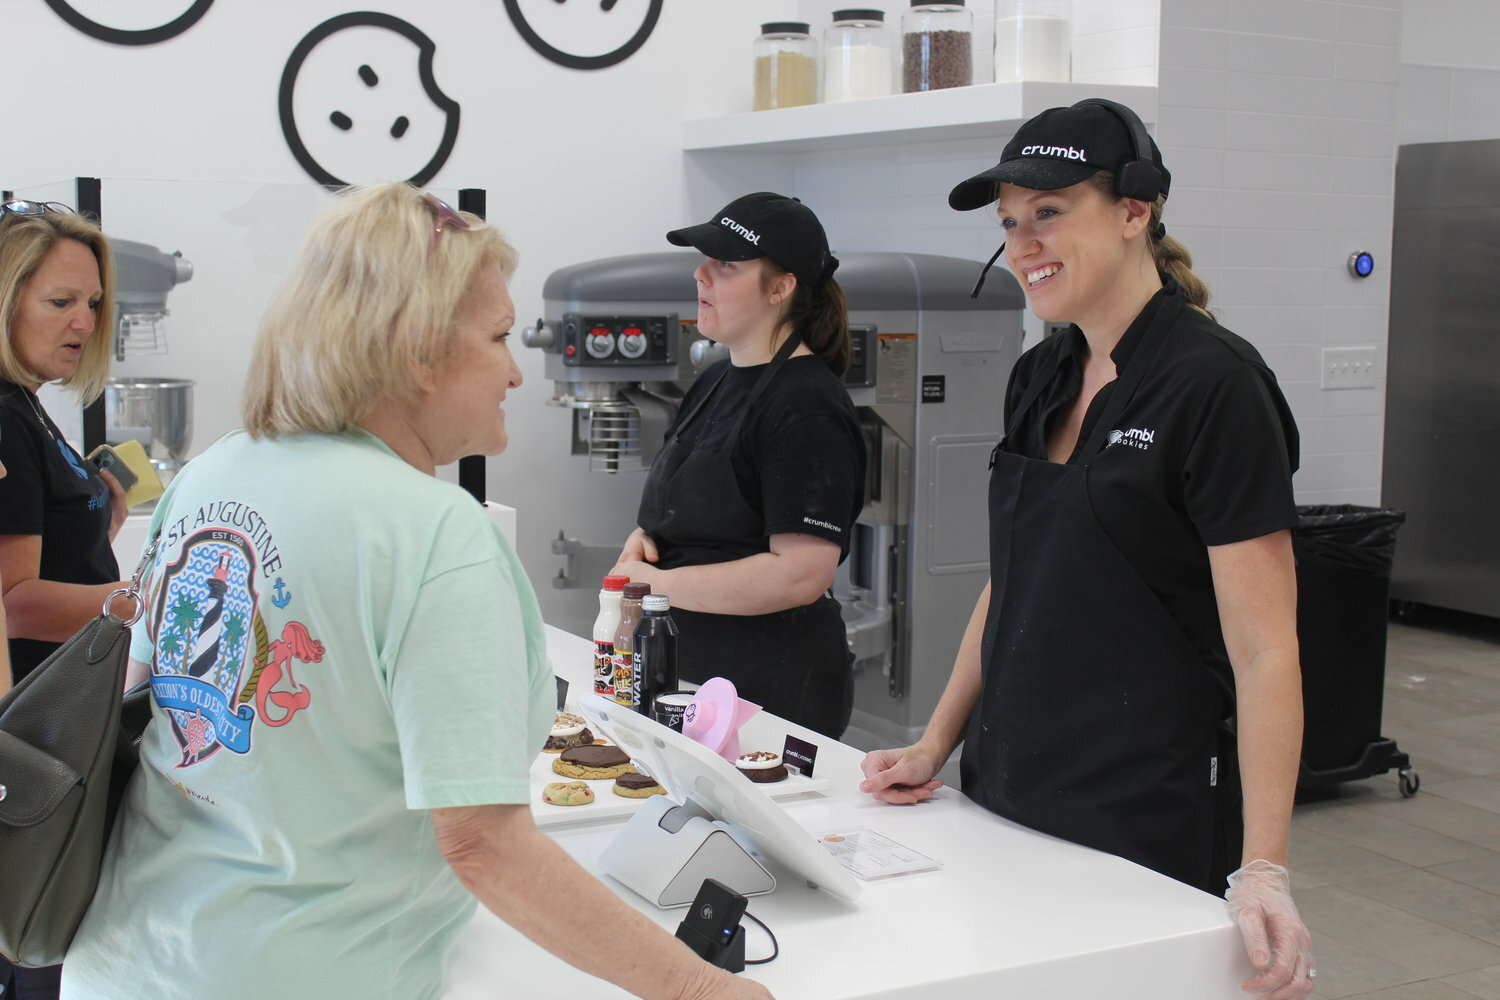 Kayla Roof, co-owner of Crumbl Cookies Daphne and Spring Hill greets a customer in the Daphne store.